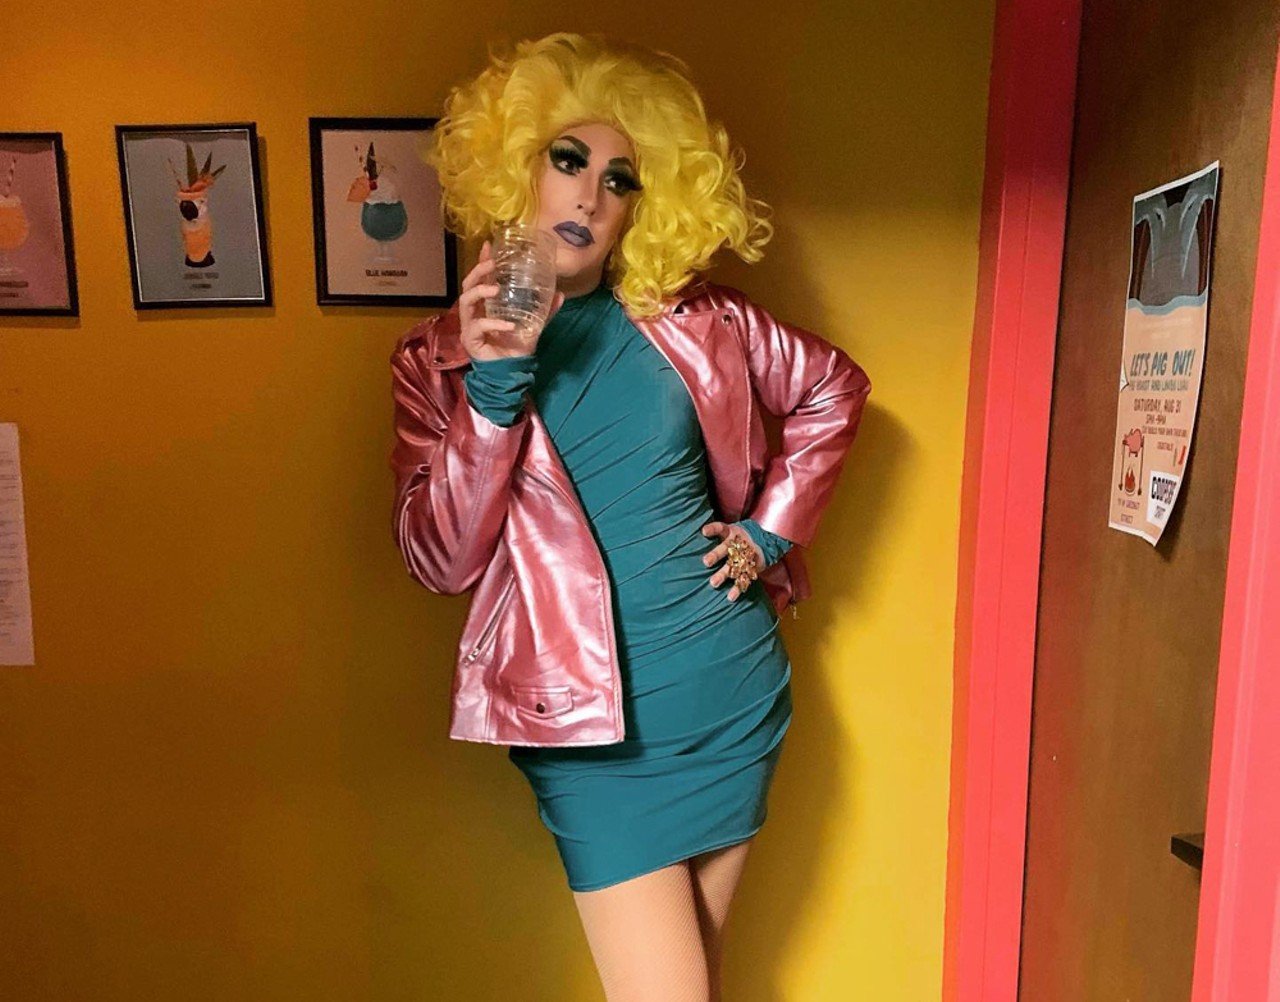  Beverly Hellz 
@bevhellz  
Beverly Hellz is a host at Play Louisville's "Haute Mess Wednesday.&#148; This vivacious gal is often found raising hell at Le Moo, too.
Photo via bevhellz/Instagram